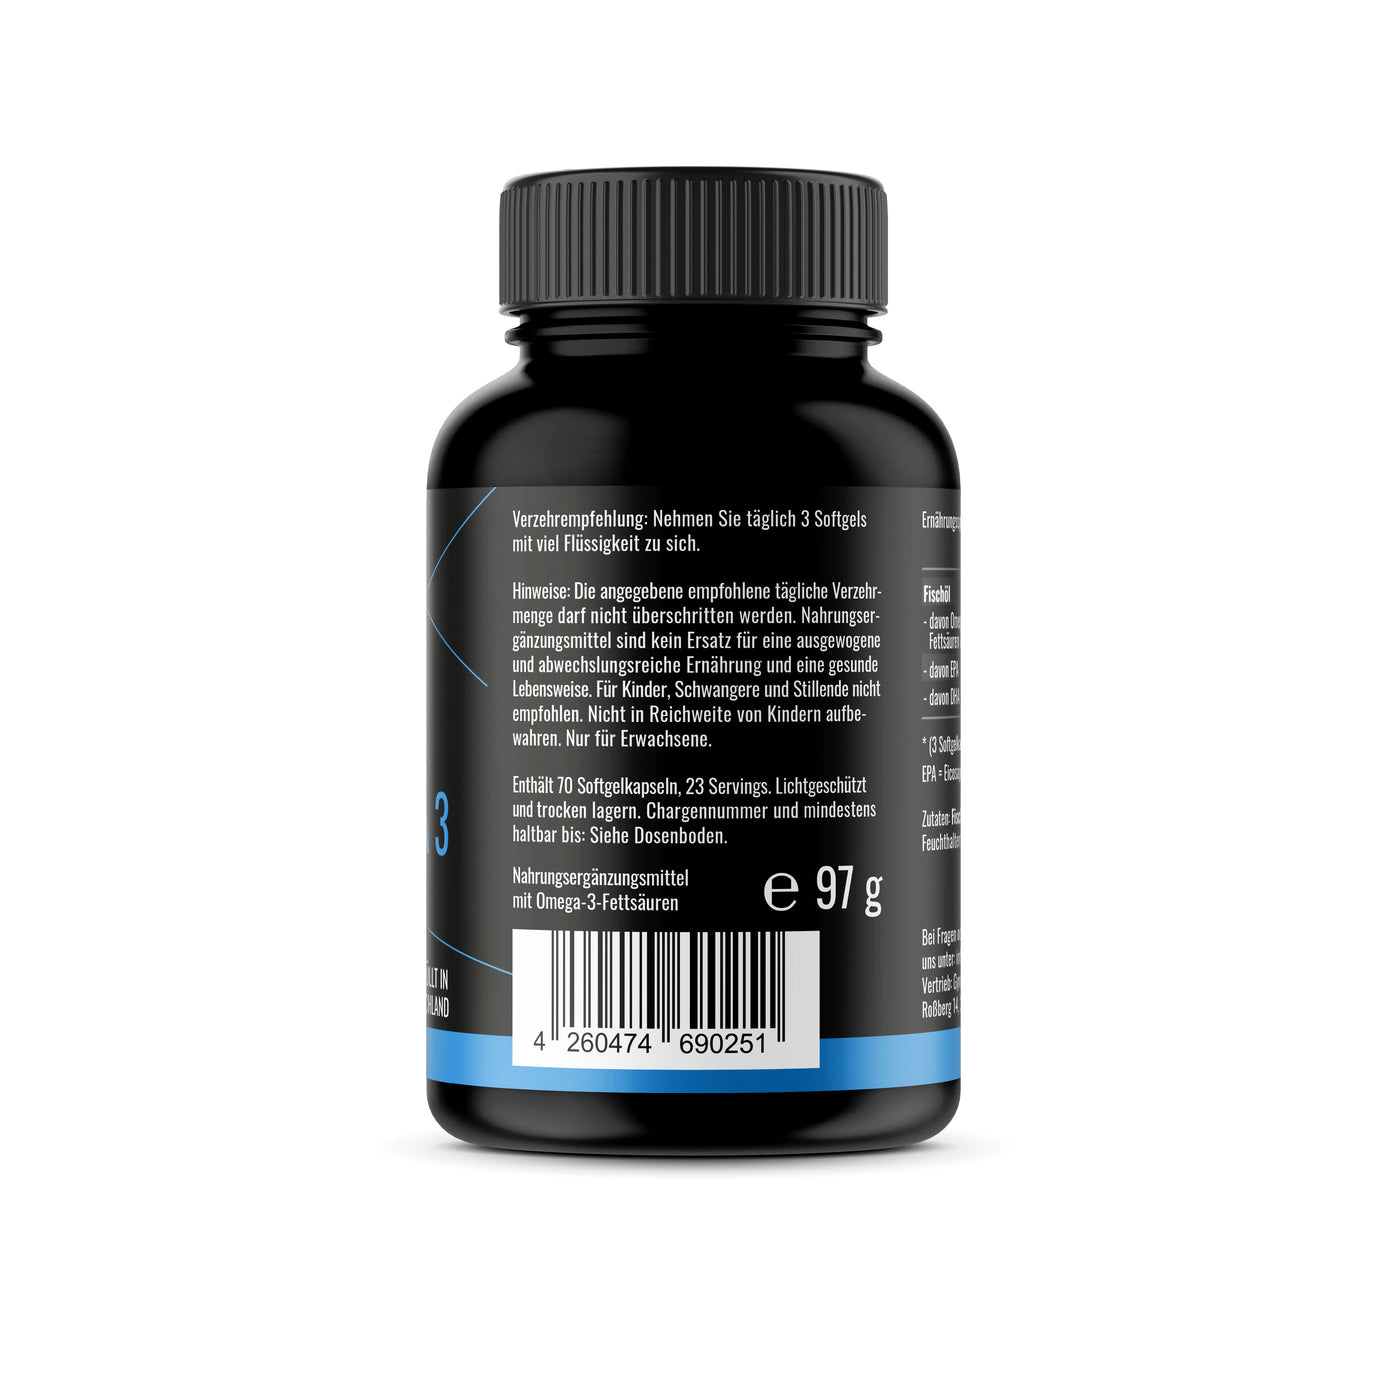 Omega 3 capsules - 3000mg high dose | 70 pure fish oil capsules obtained from anchovy with EPA & DHA in triglyceride form | Natural fish oil without genetic engineering | Made from essential fish oil fatty acids |